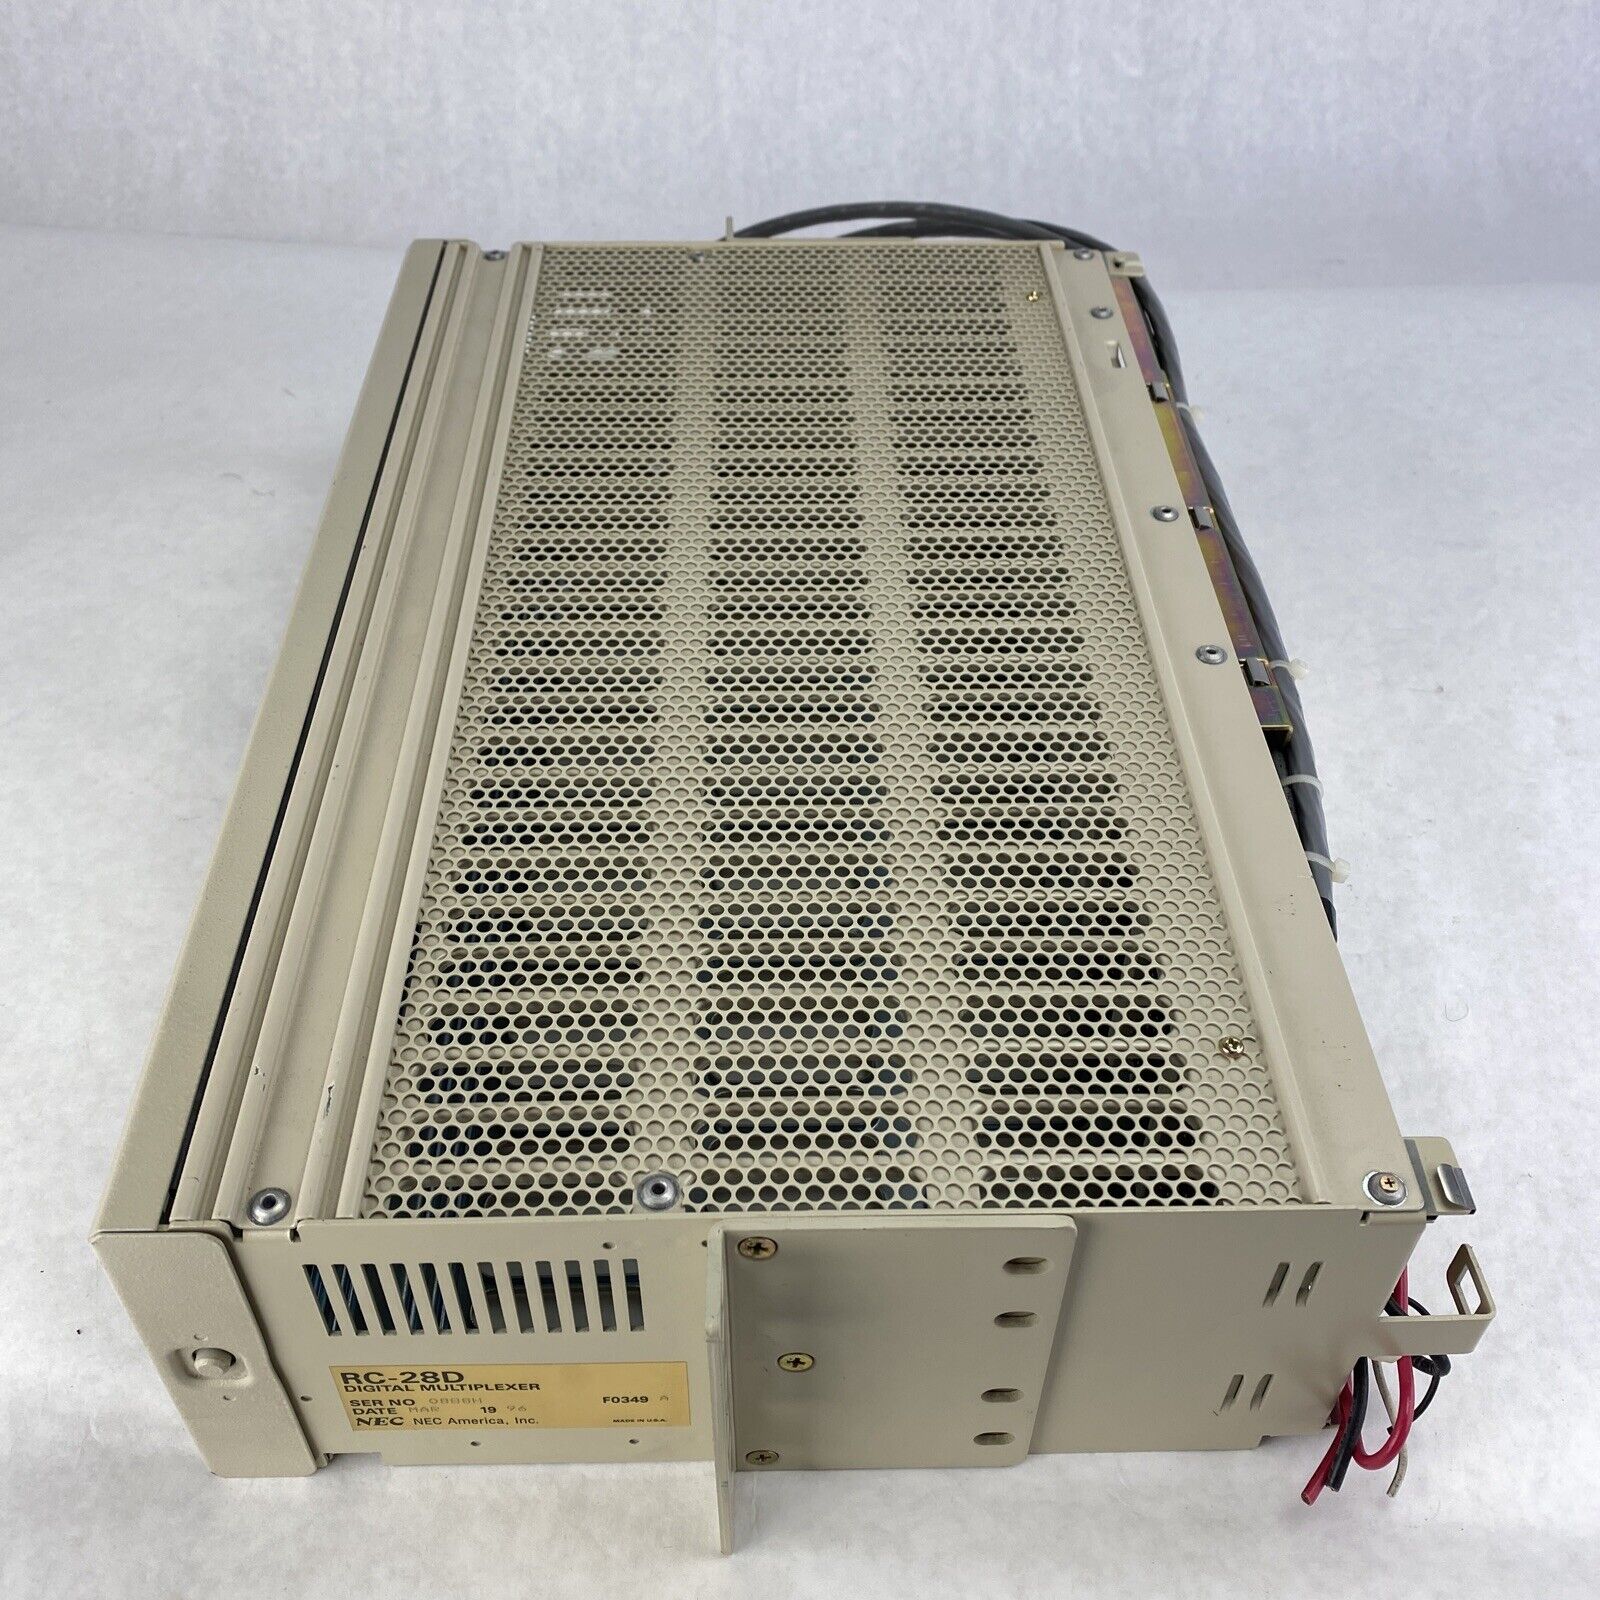 NEC RC-28D Digital Multiplexer Chassis Only w/ Severed Power Cord